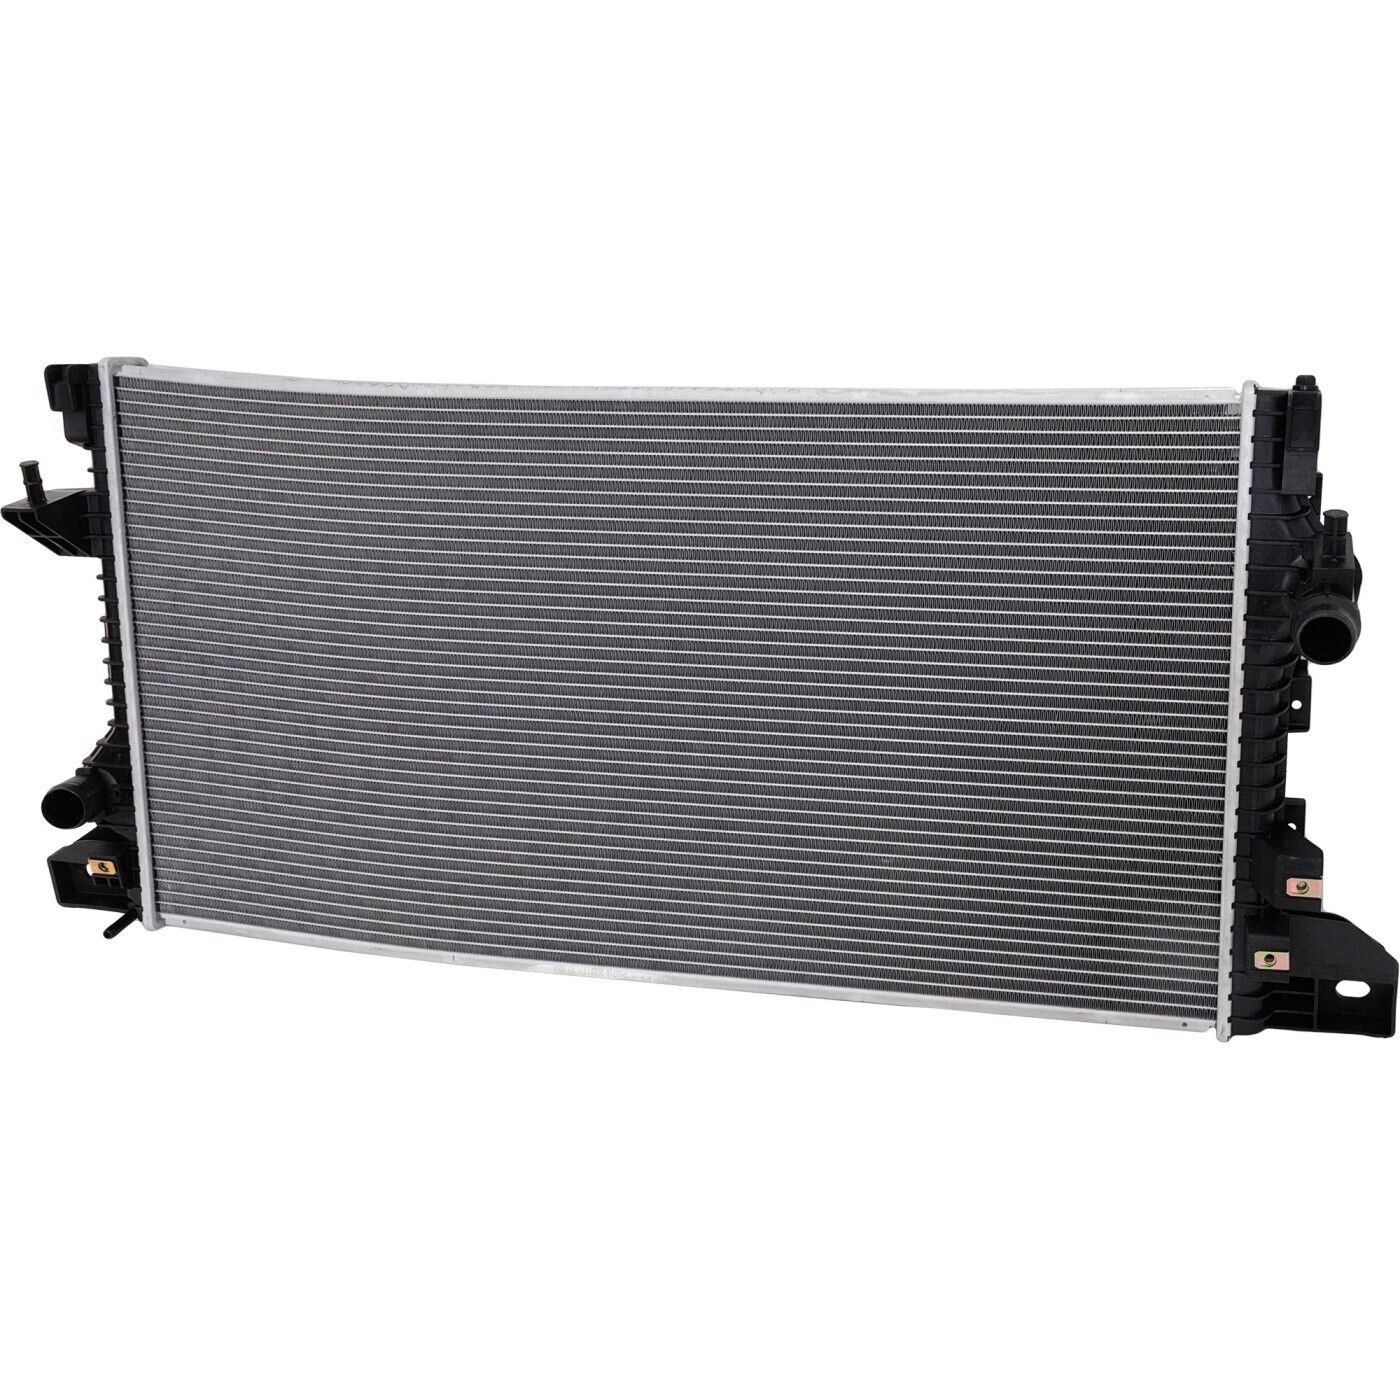 Radiators for F150 Truck  HL3Z8005B Ford F-150 Expedition Lincoln Navigator